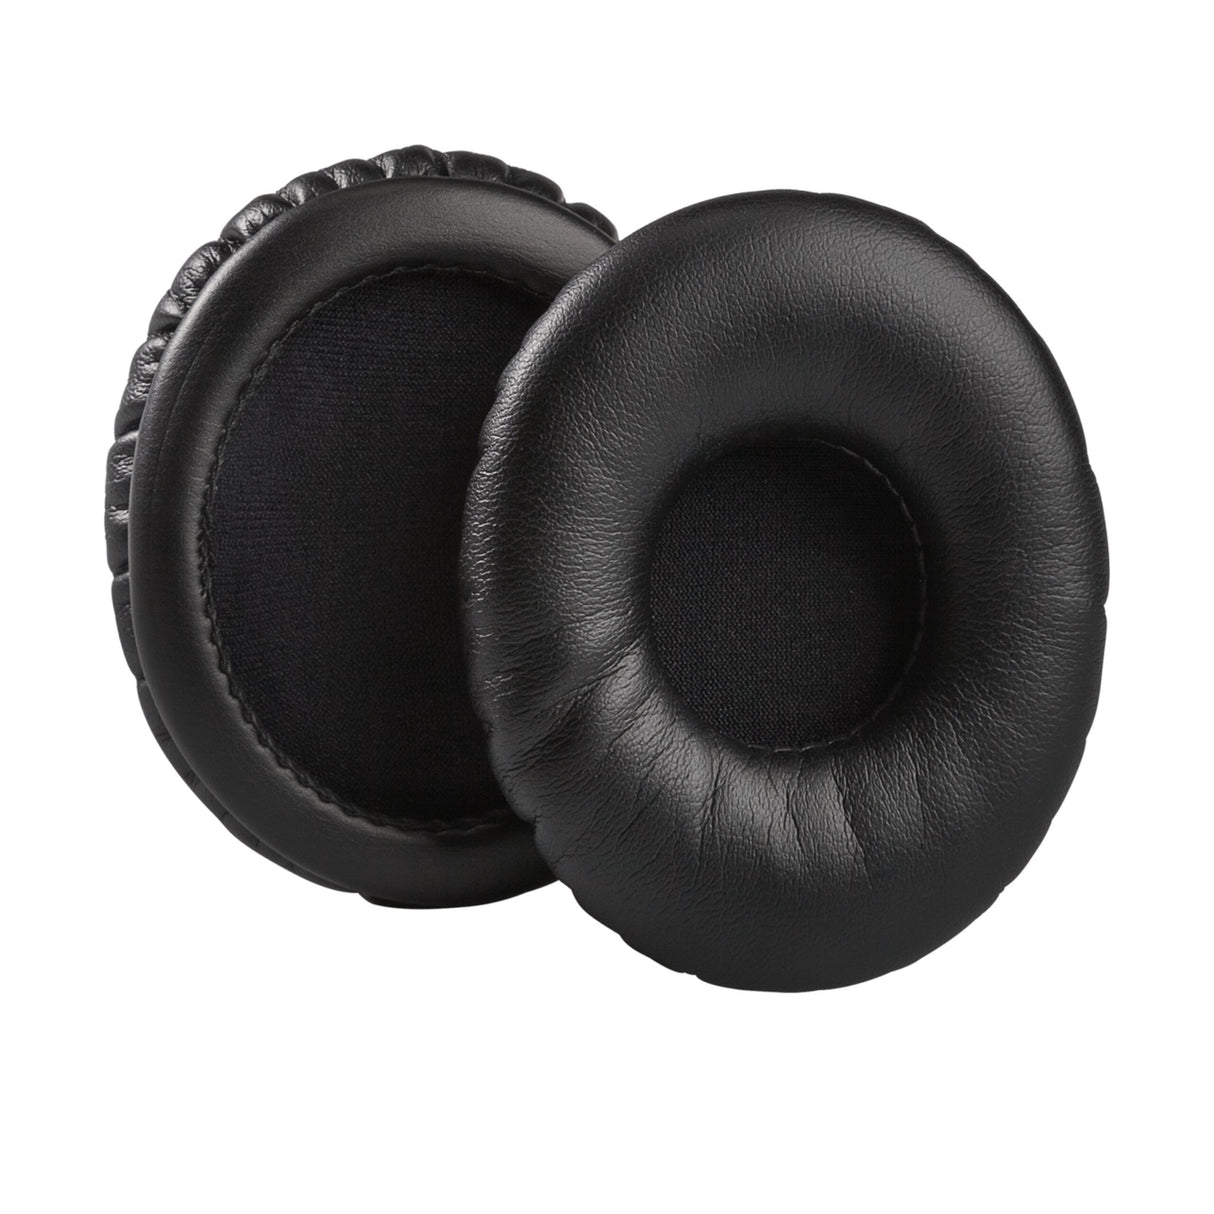 Shure BCAEC50 Replacement Ear Pads for BRH50M, Pair